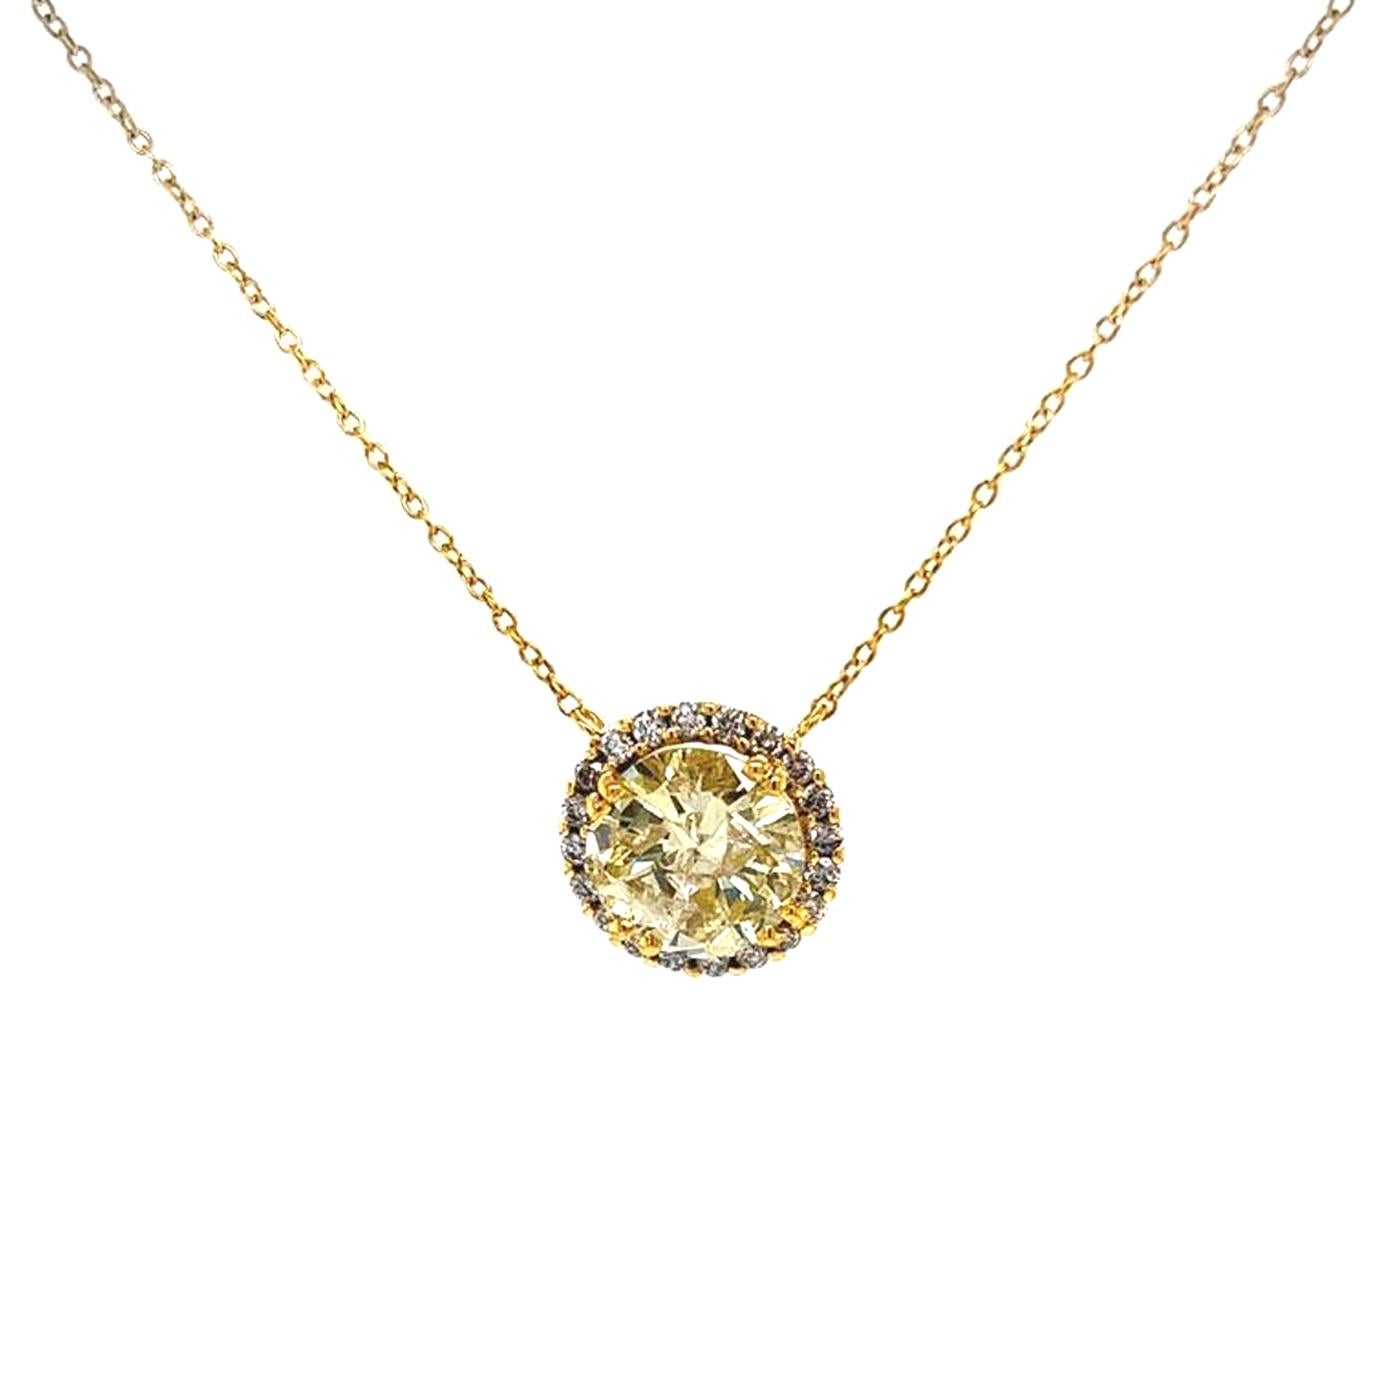 Beautiful 3.15 carat fancy round natural yellow diamond with eye-clean I1 clarity, bezel set in a halo of round brilliant diamonds. Accent diamonds are micro-pave sets and weigh 0.71 carats in total. made in 18 Karat gold on an 18-inch gold chain